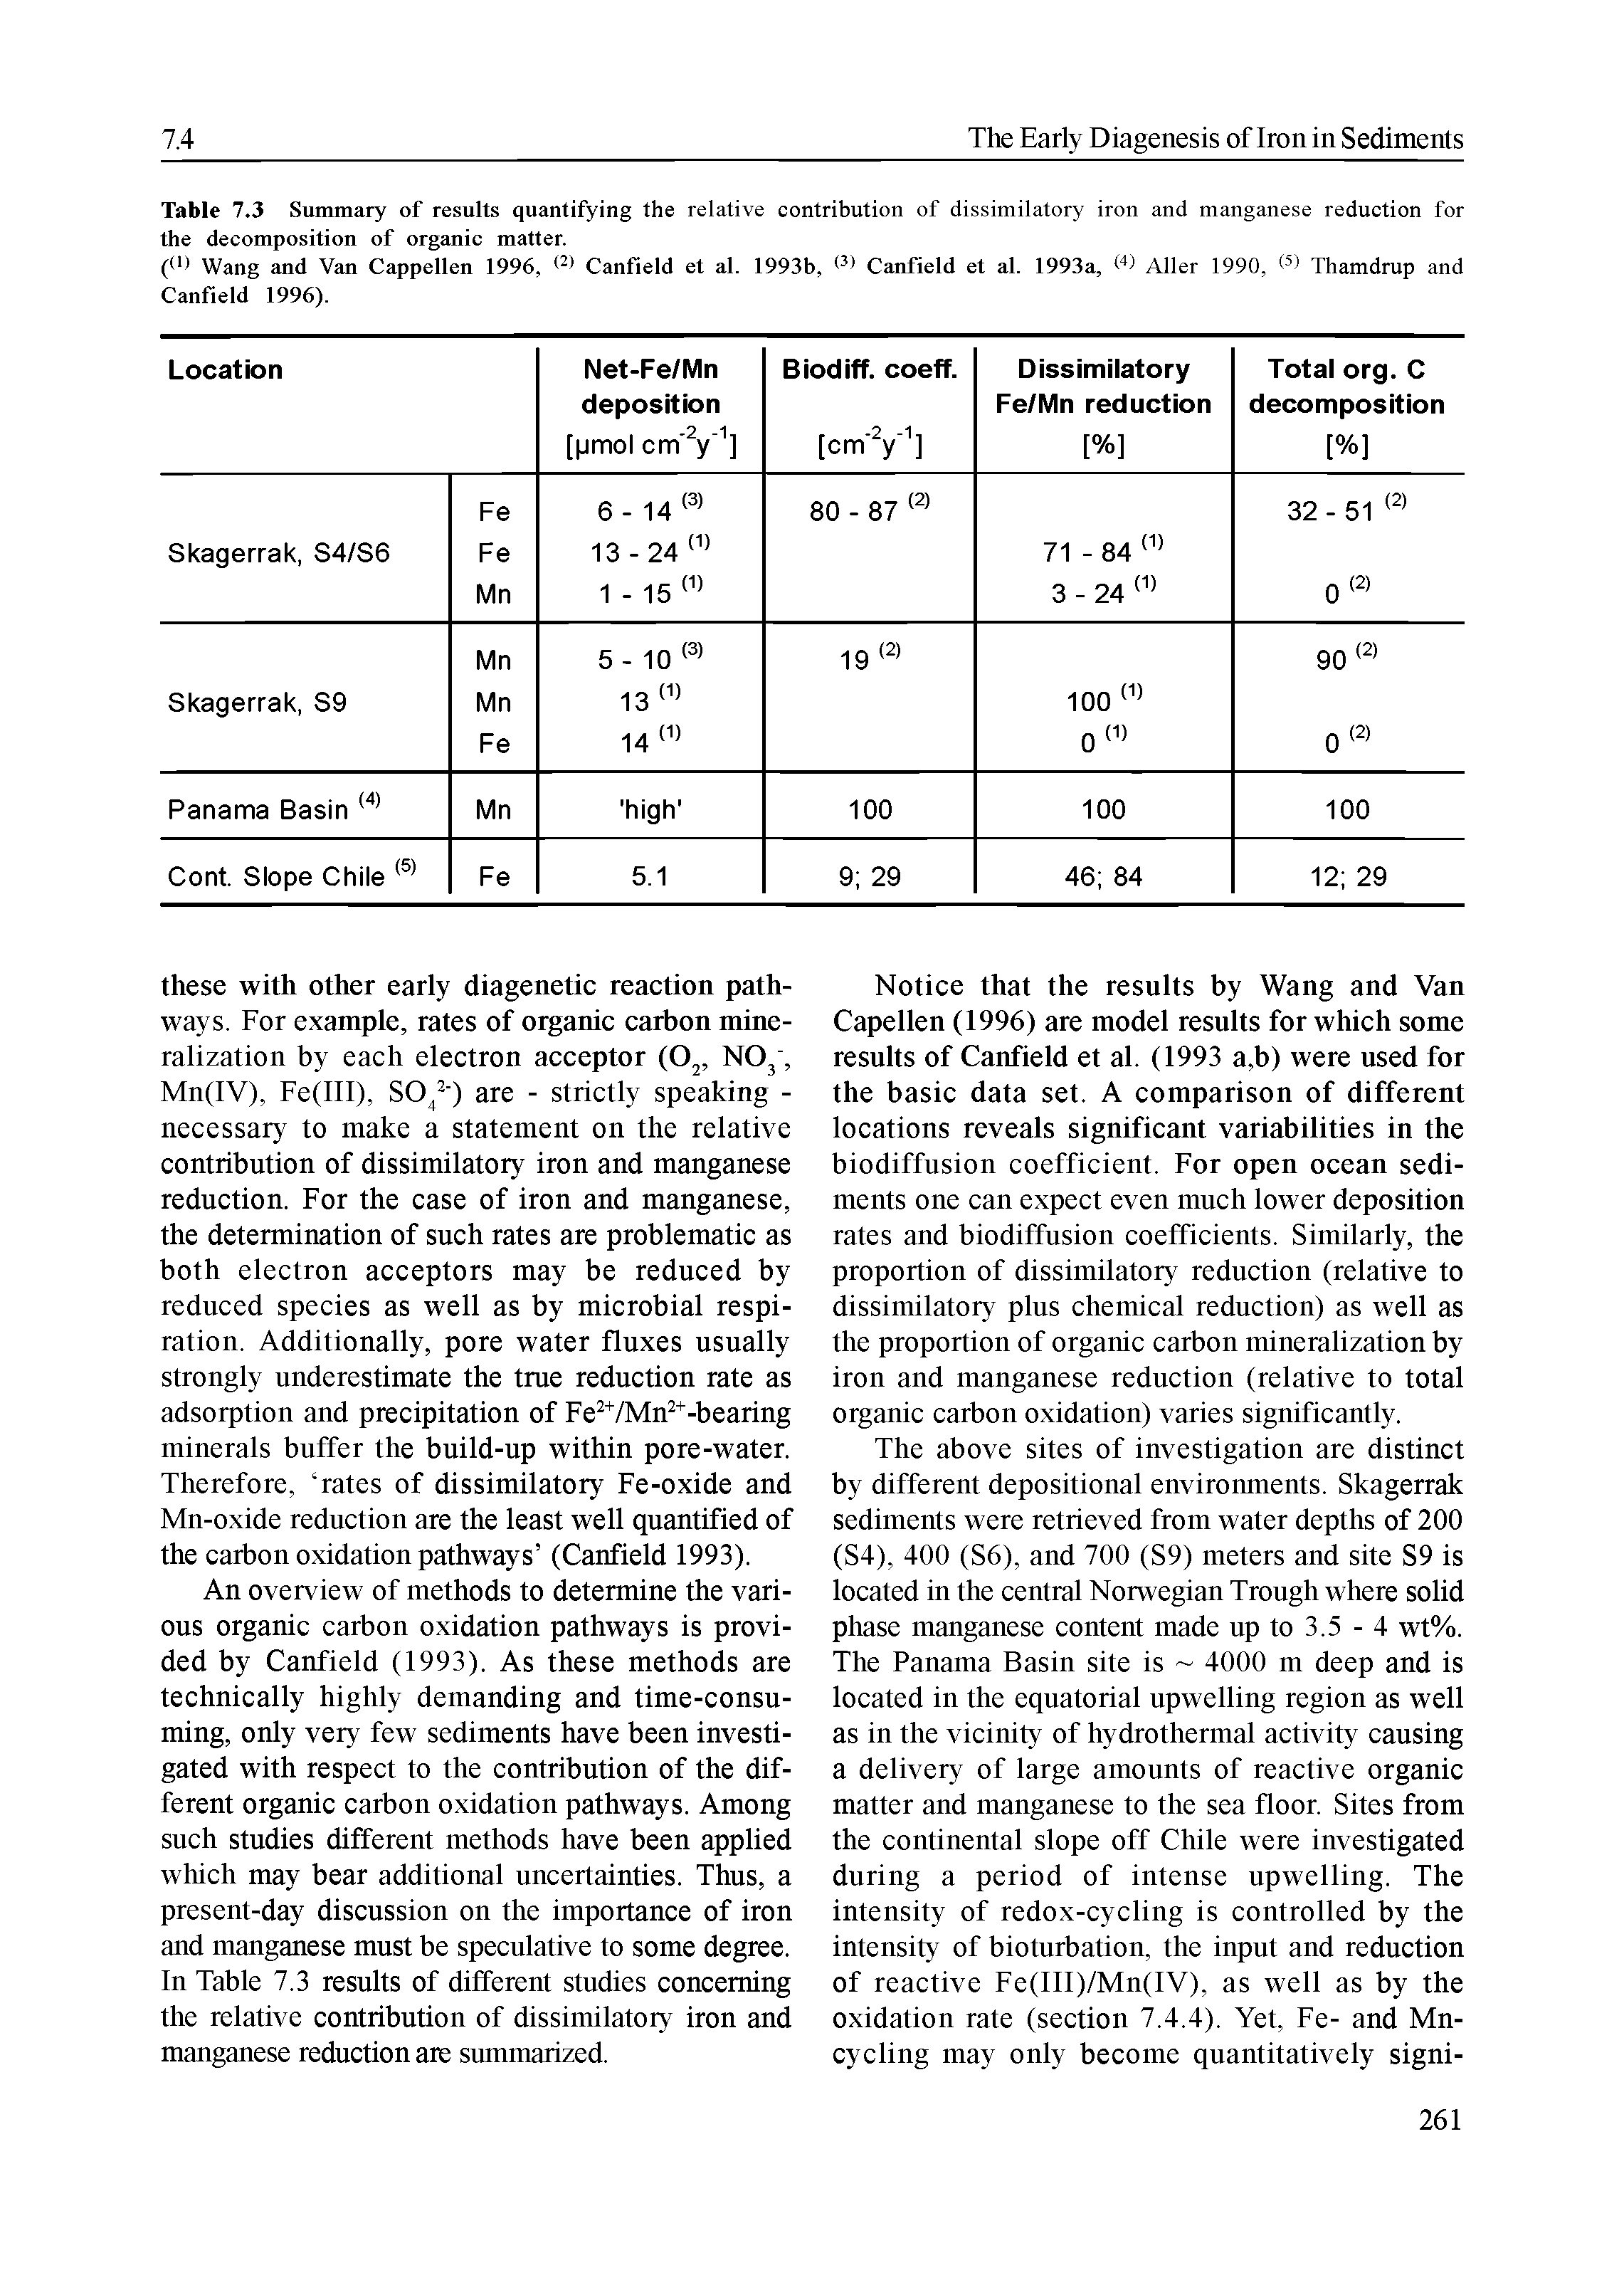 Table 7.3 Summary of results quantifying the relative contribution of dissimilatory iron and manganese reduction for the decomposition of organic matter.